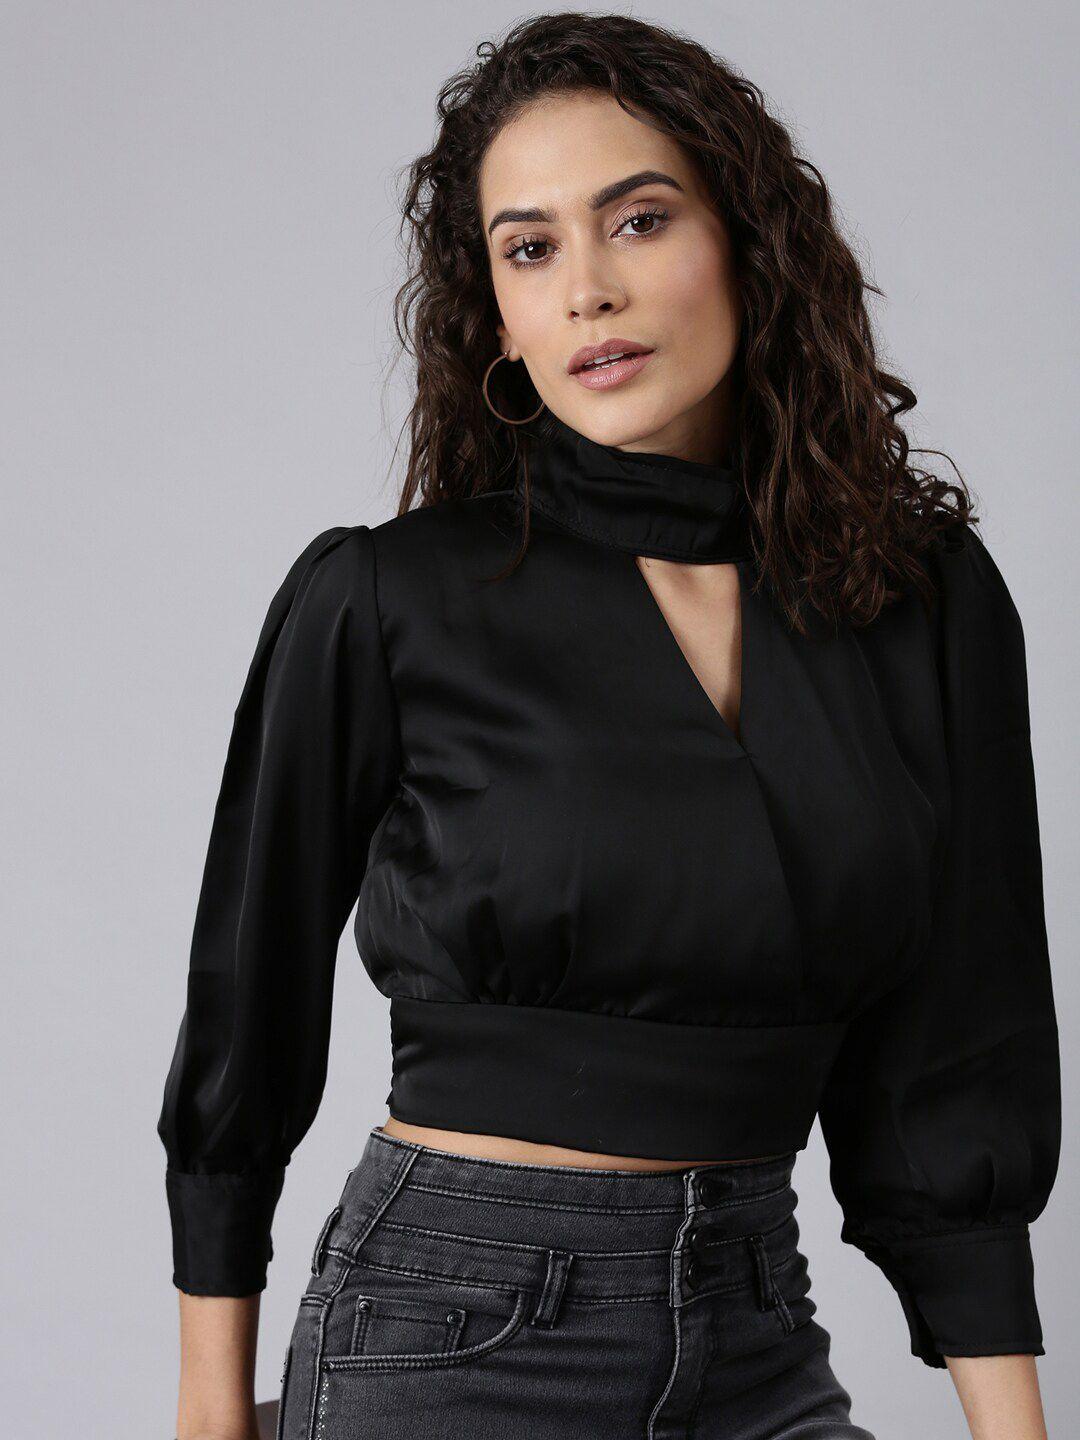 showoff-high-neck-cuffed-sleeves-cut-outs-blouson-crop-top